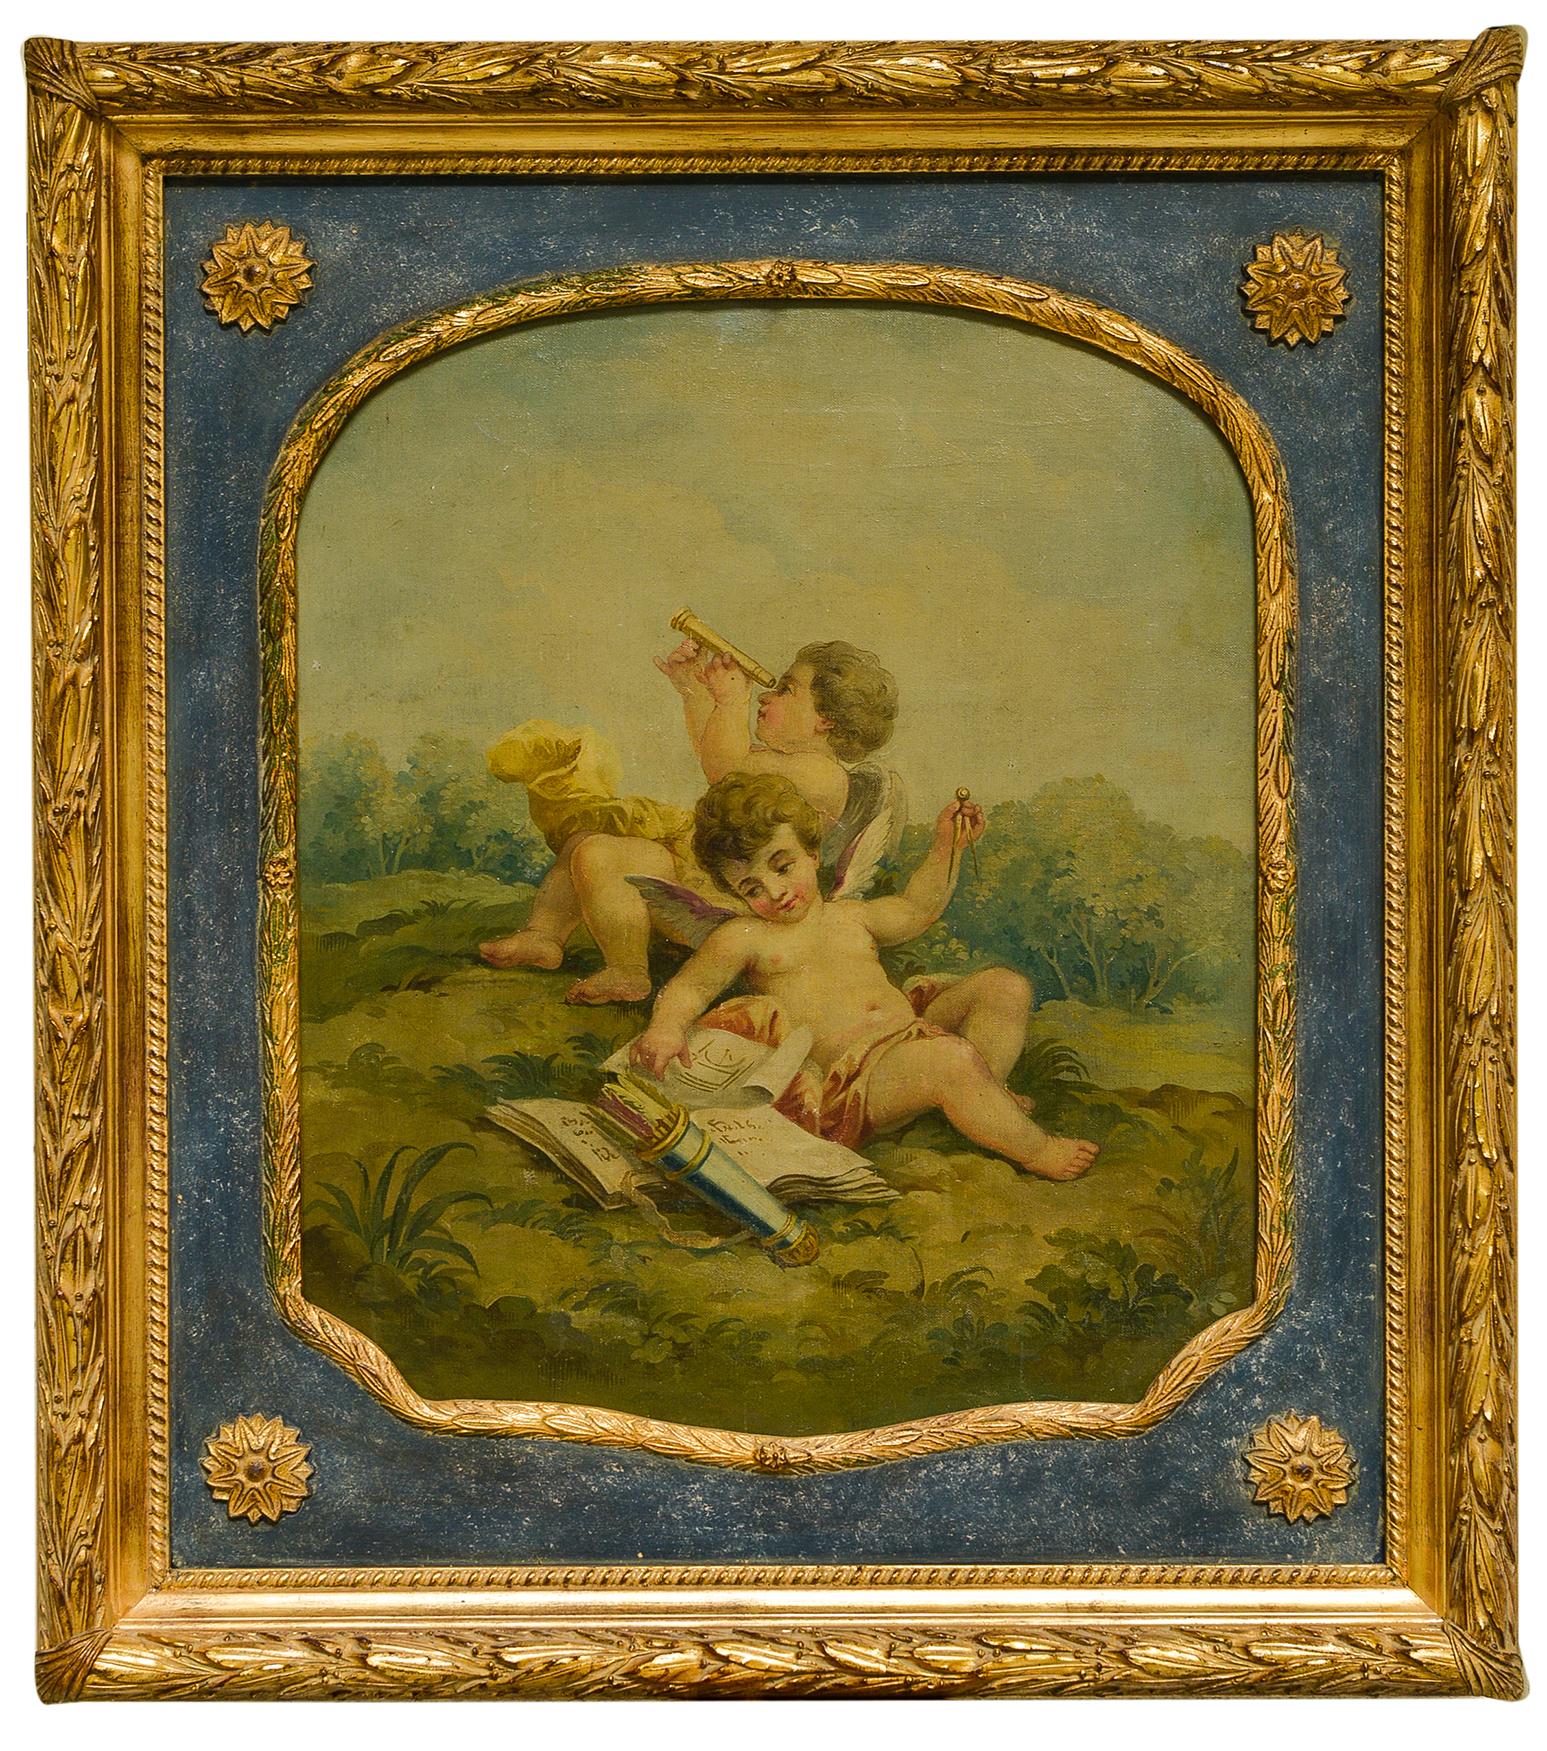 Rare Set of Three Paintings with Putti from Aubusson Tapestry School  In Excellent Condition For Sale In Alessandria, Piemonte